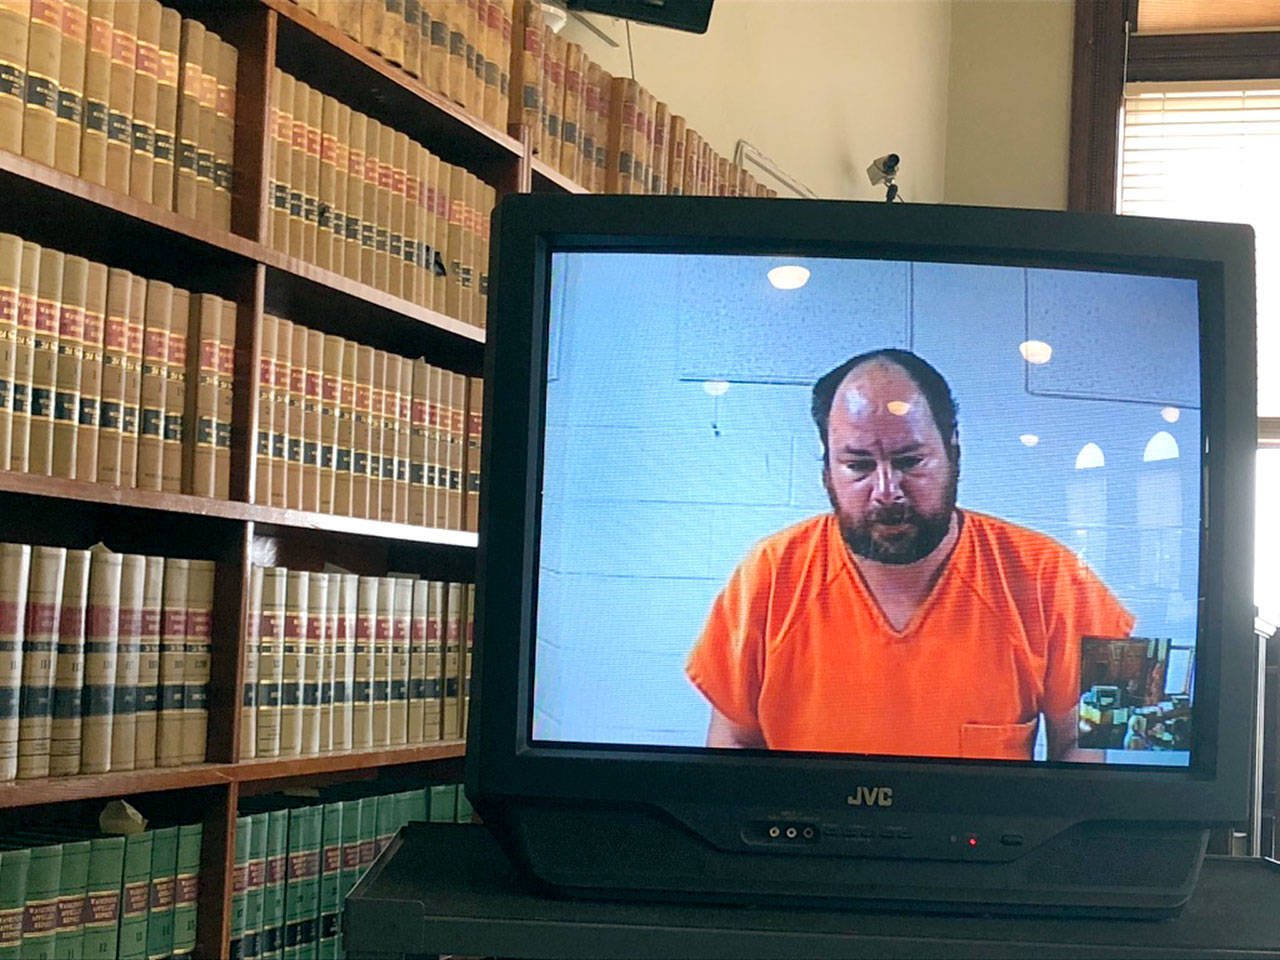 Brandon B. Smith, a transient man, allegedly attacked a woman at a homeless camp in Port Townsend on Tuesday. He is shown on a television monitor at his court appearance. (Jeannie McMacken /Peninsula Daily News)